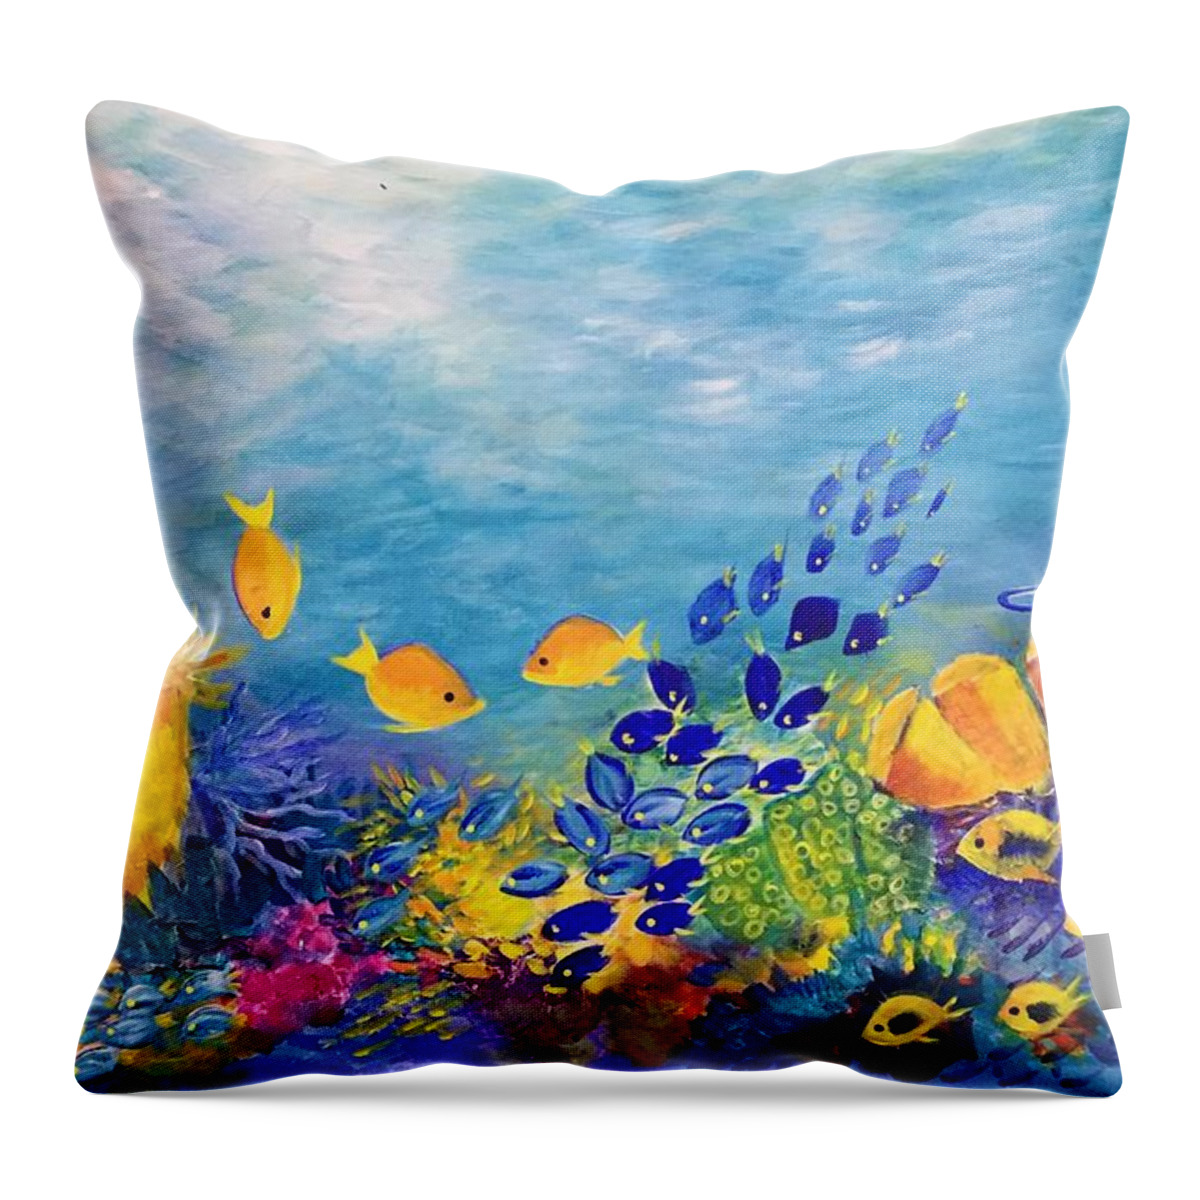 Coral Throw Pillow featuring the painting Golden Glow by Lyn Olsen